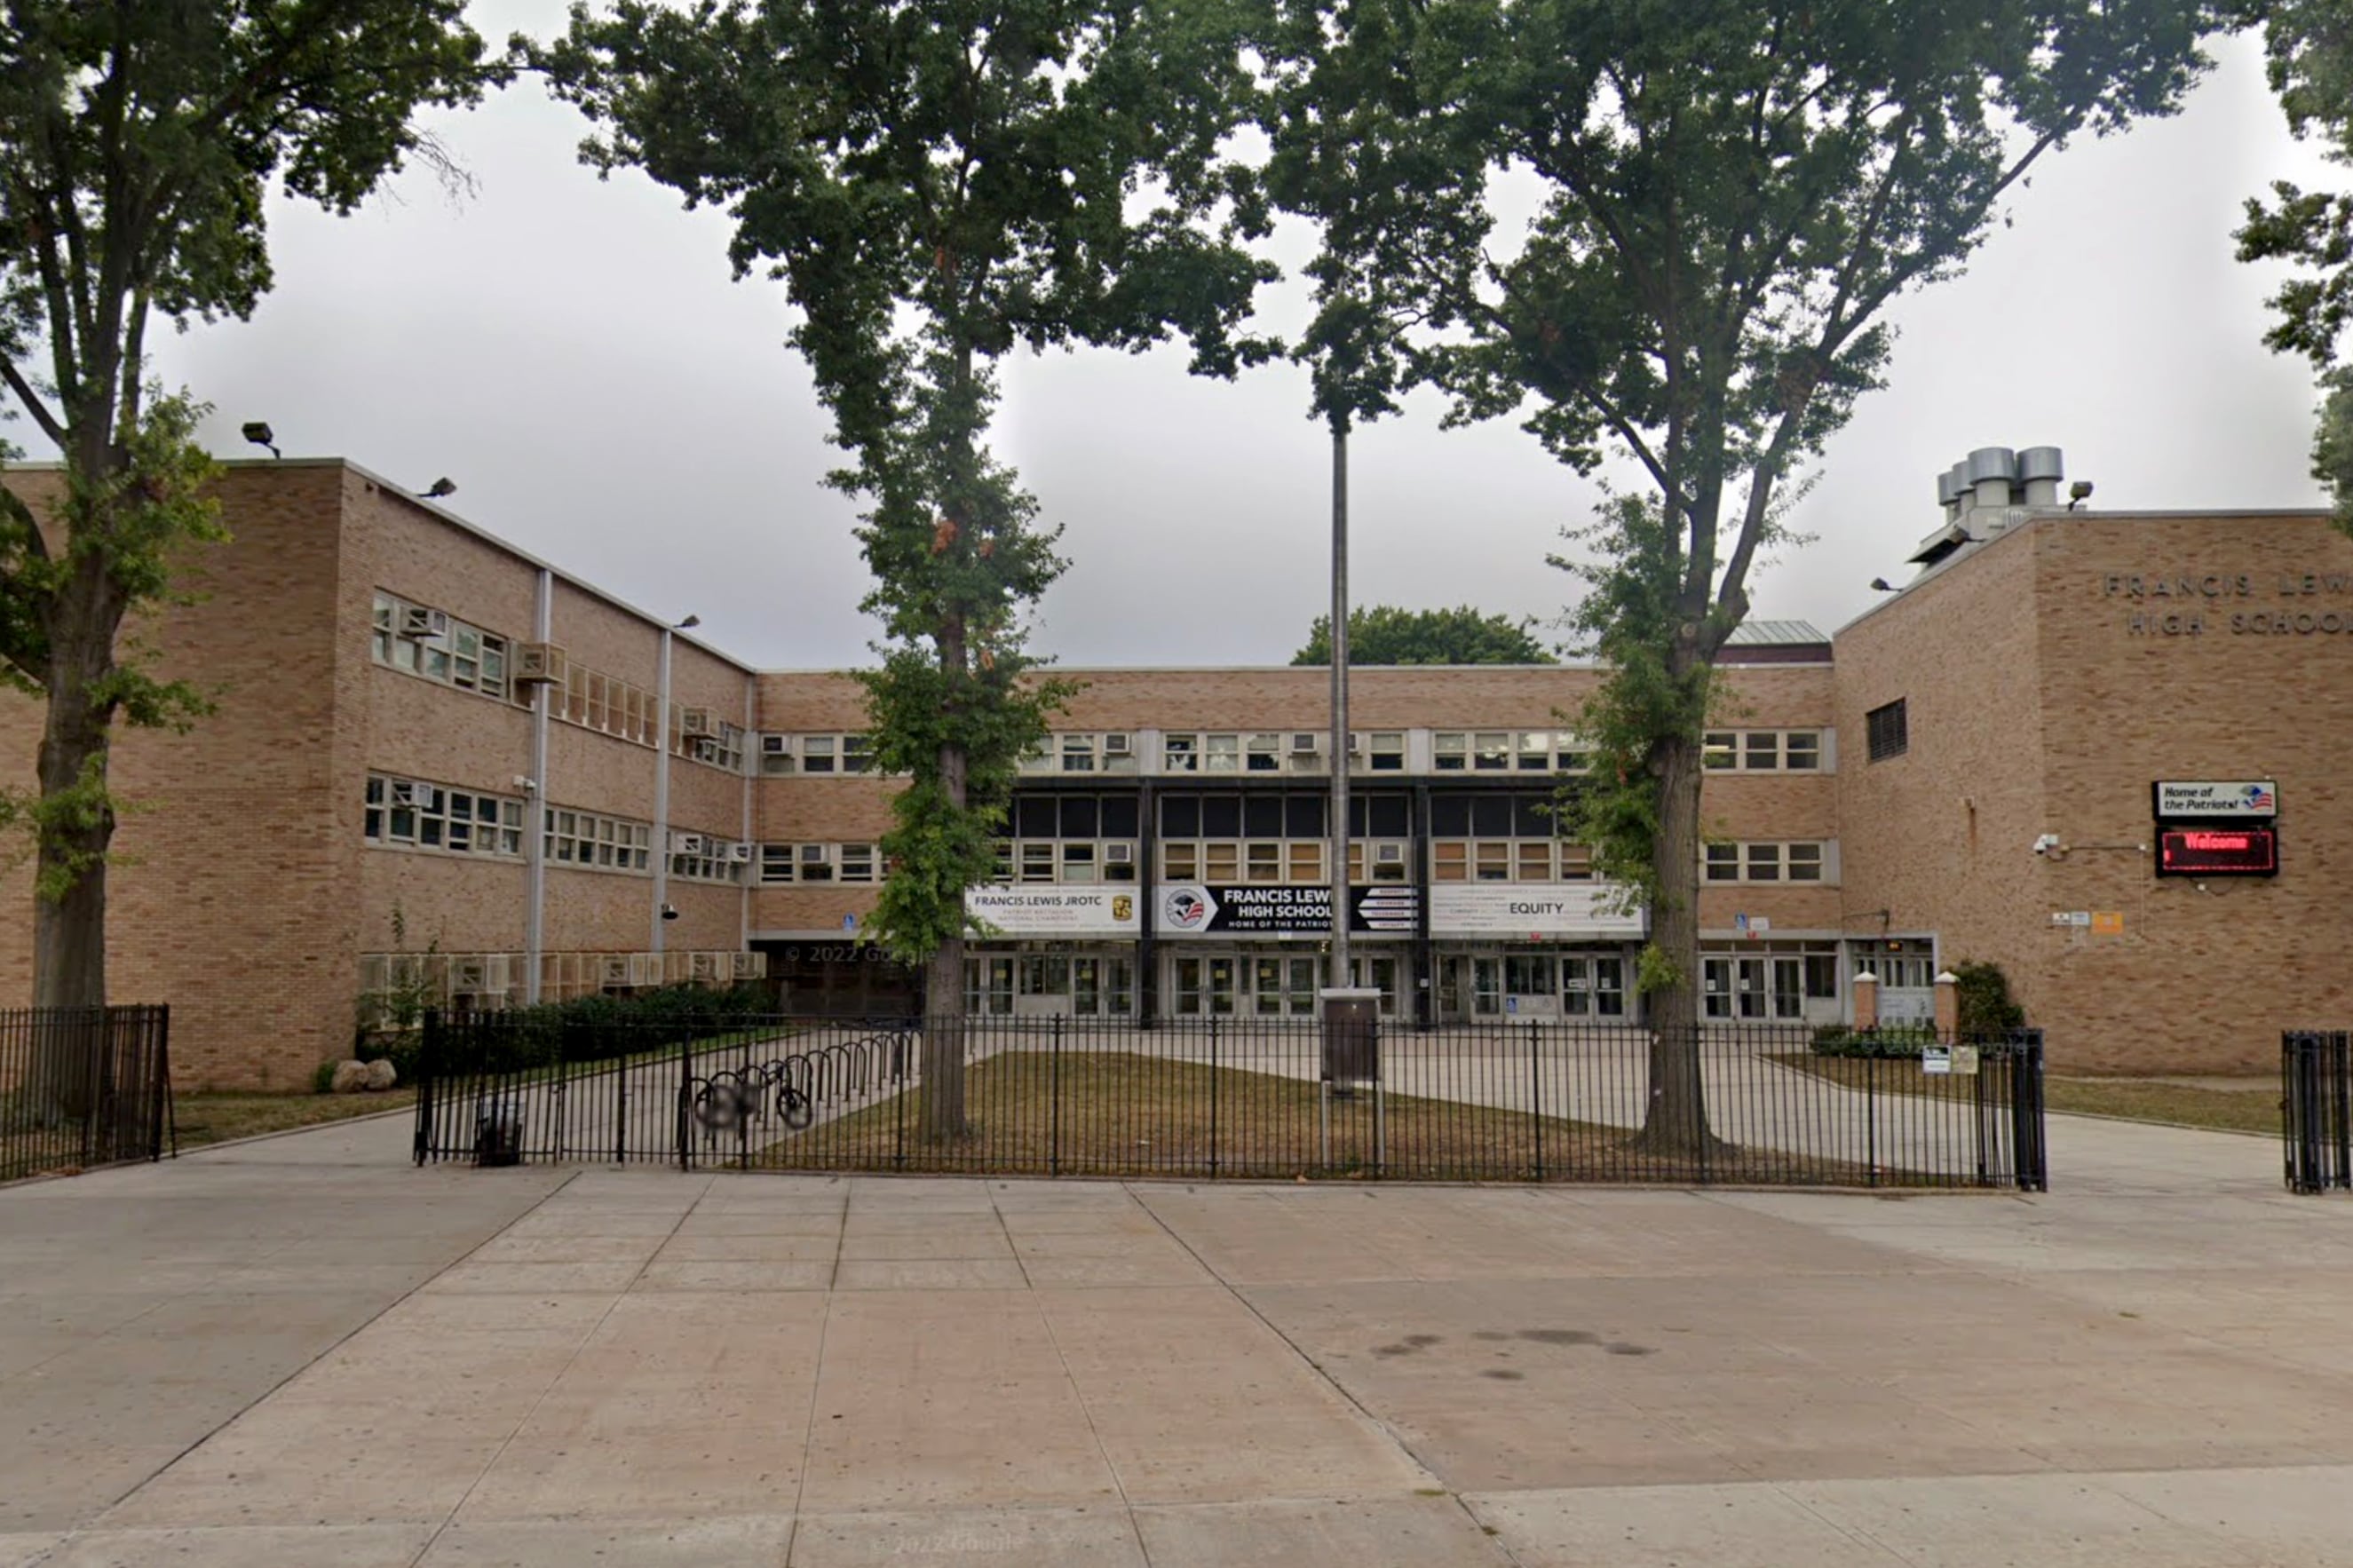 The exterior of a brick school building with trees in the middle of a large courtyard